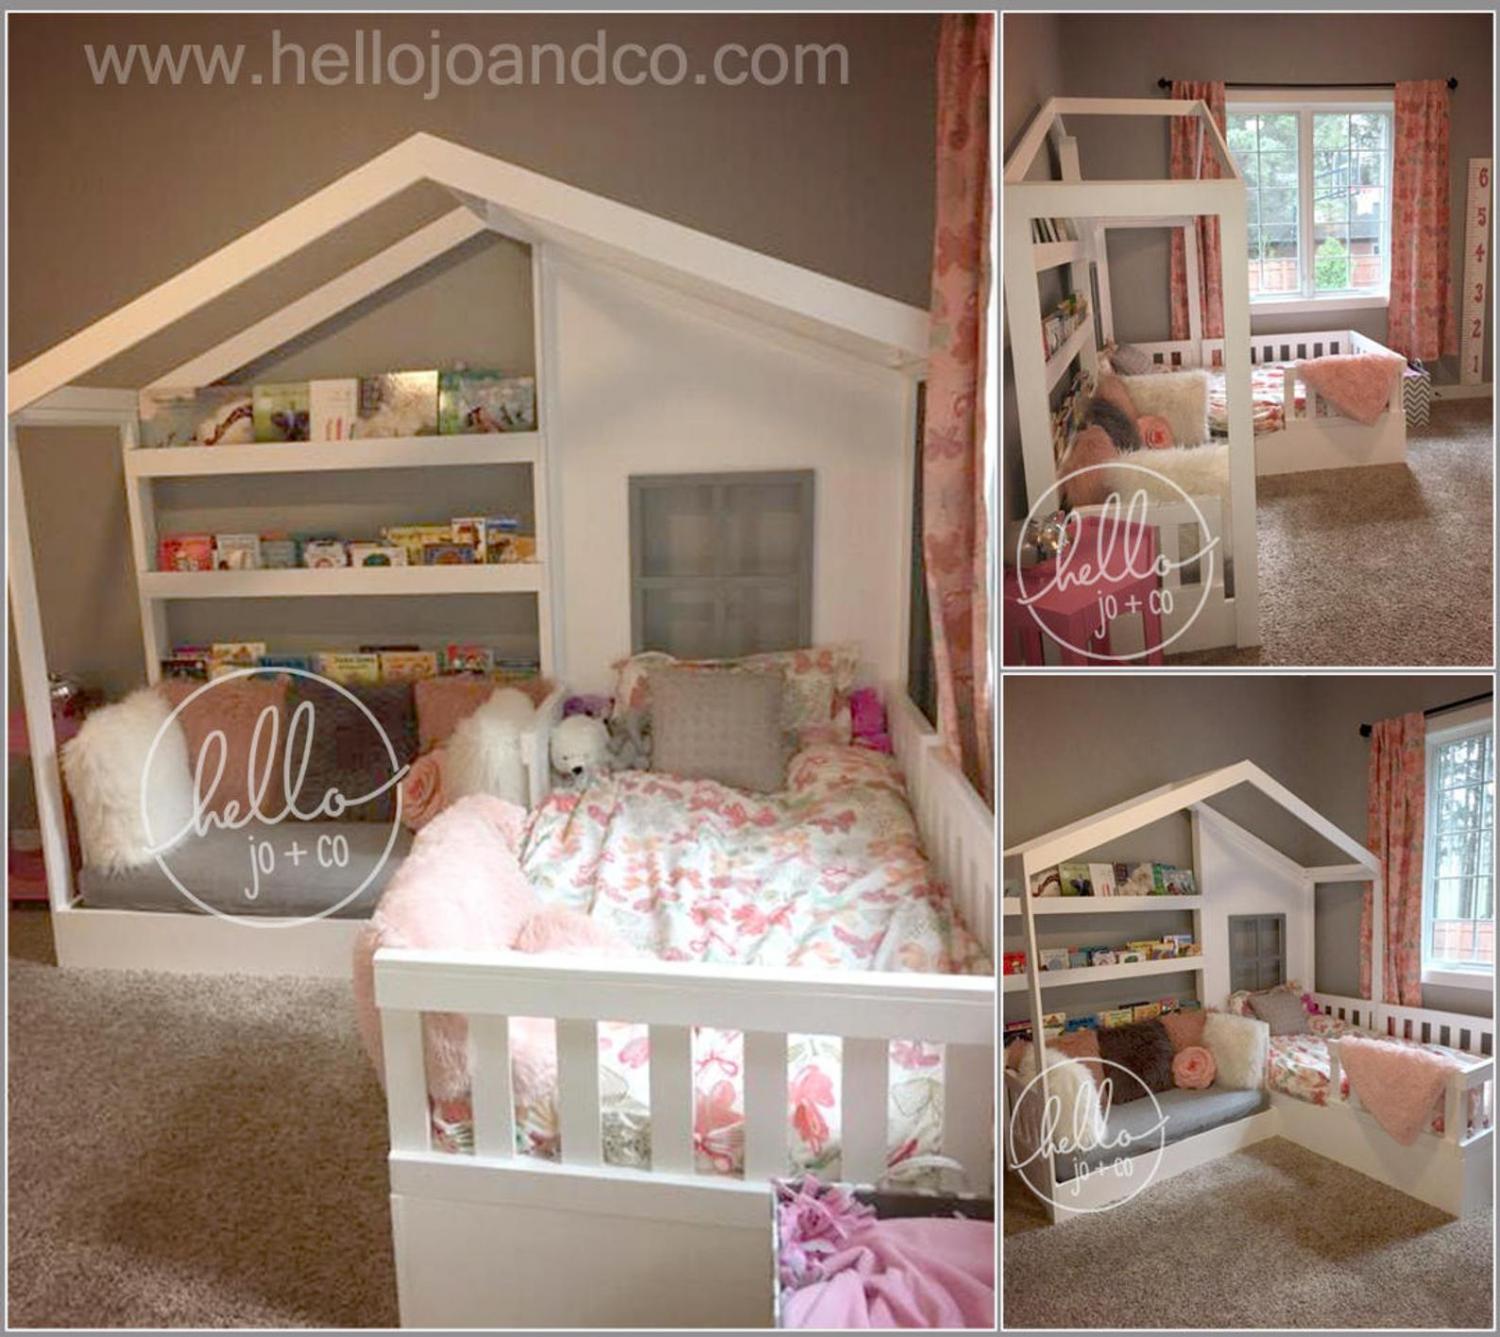  Kids Montessori Bed Has a Bed and Reading Nook In One - Kids reading nook bed frame